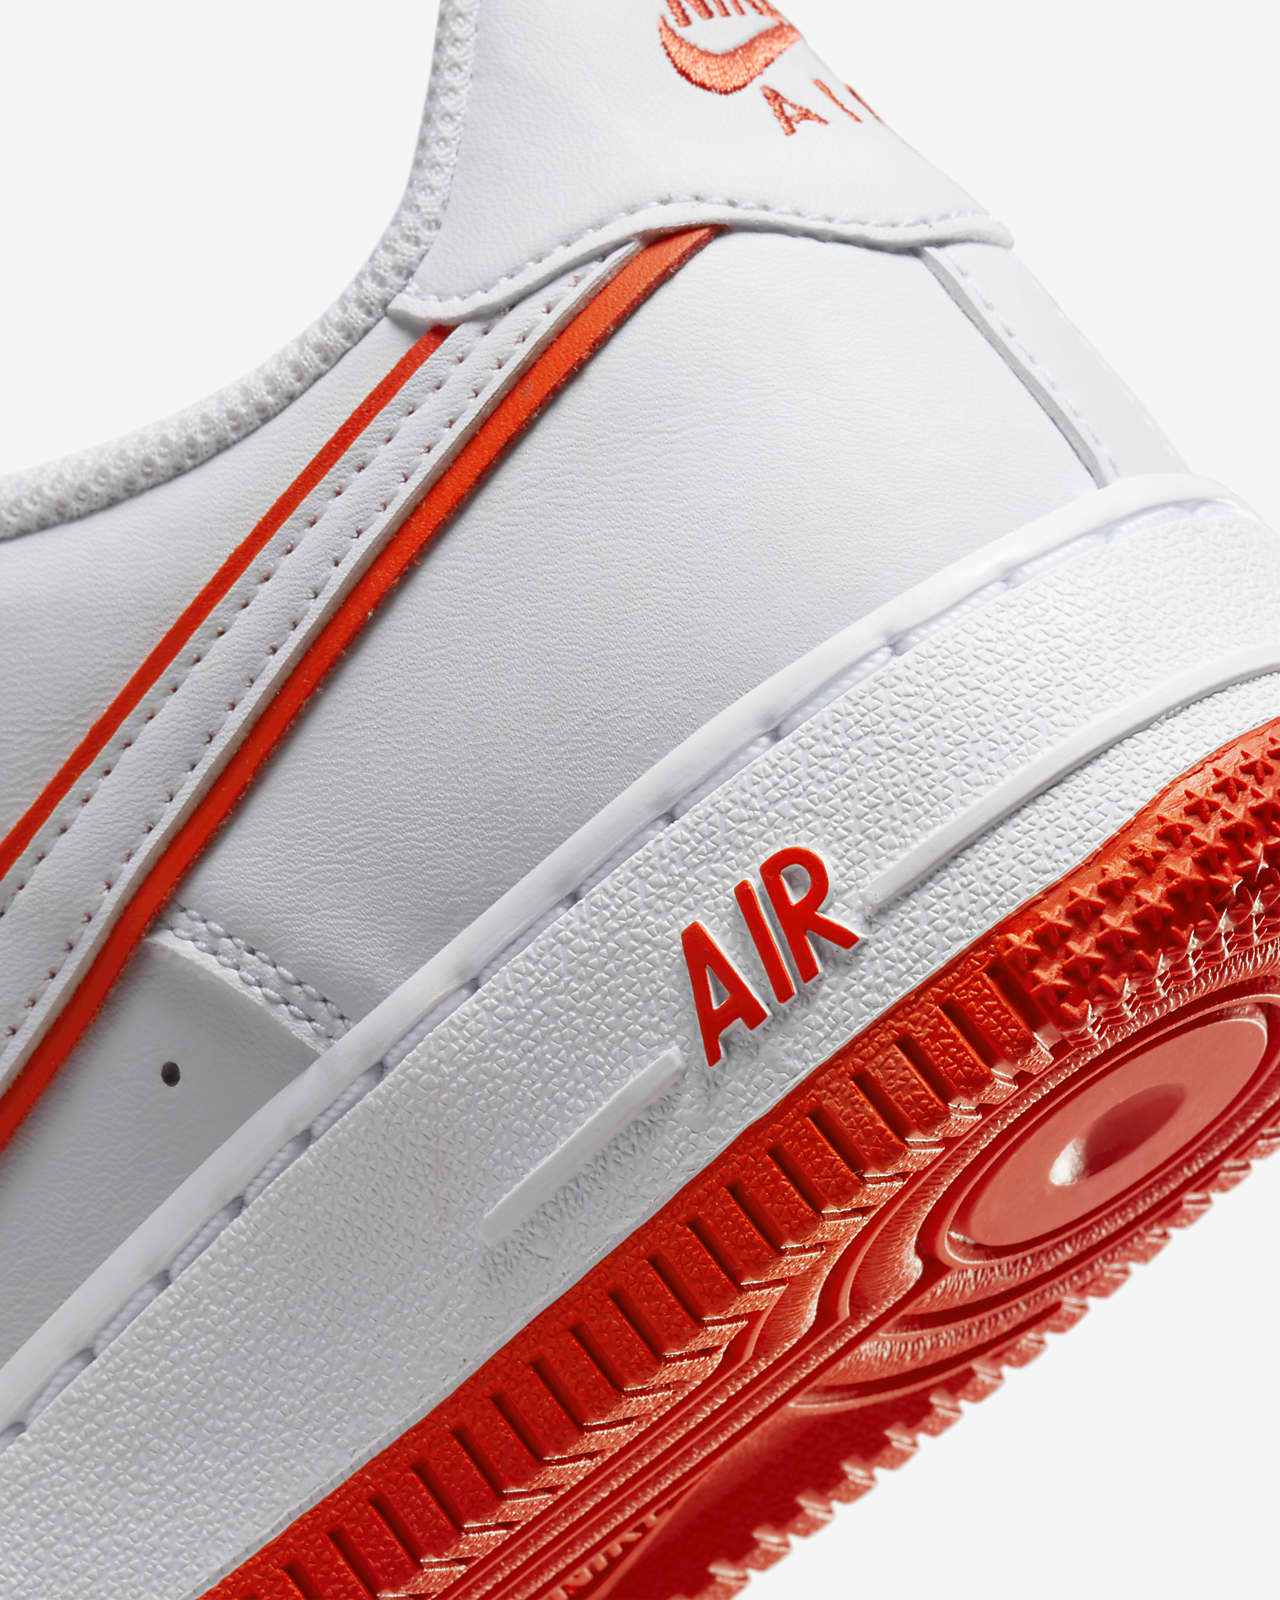 Nike Pre-School Force 1 Low White/White-Picante Red